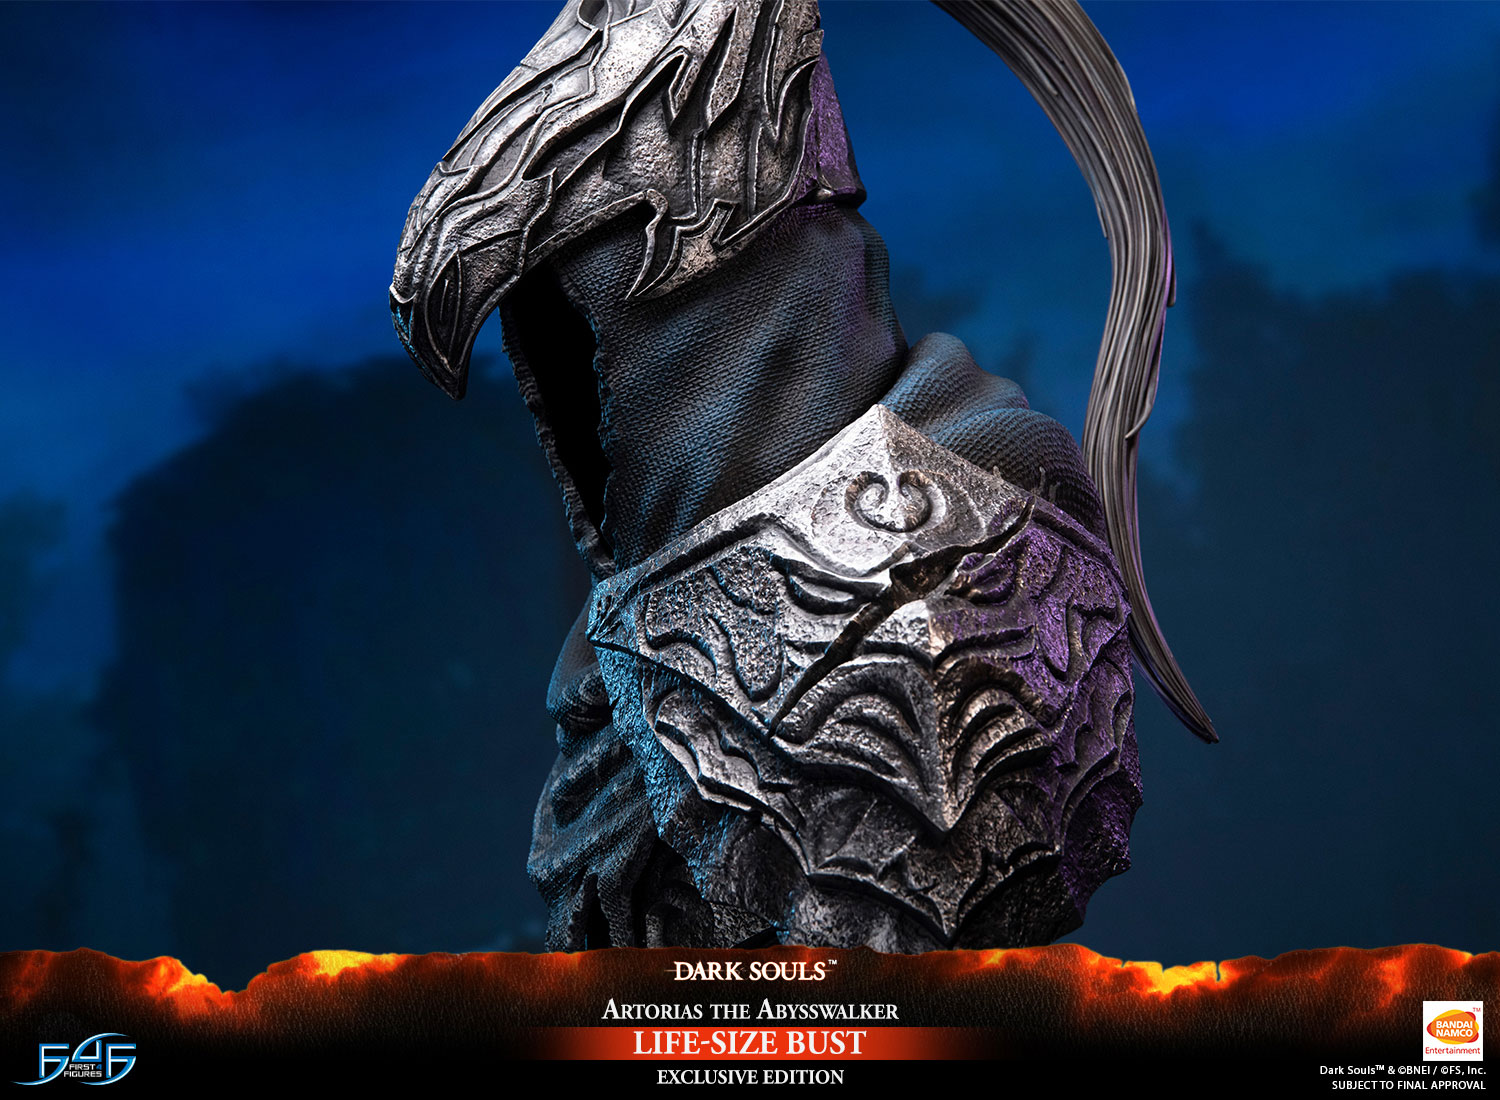 Artorias the Abysswalker Life-Size Bust (Exclusive Edition)